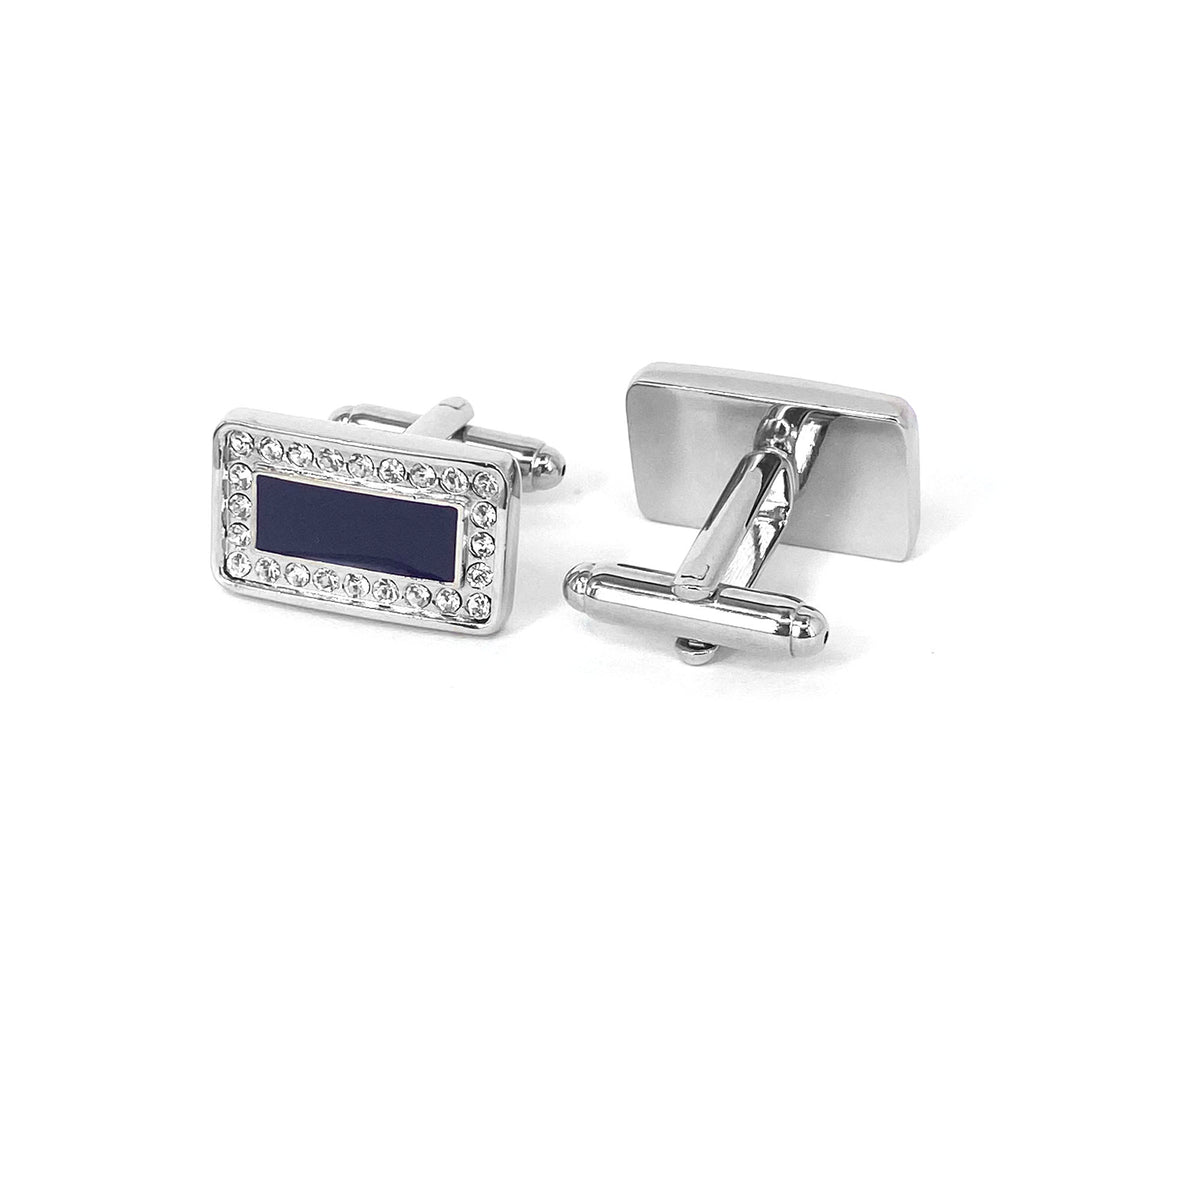 Rectangle Black Enamel Centerpiece with 24 Clear Crystals Cufflinks (Online Exclusive)